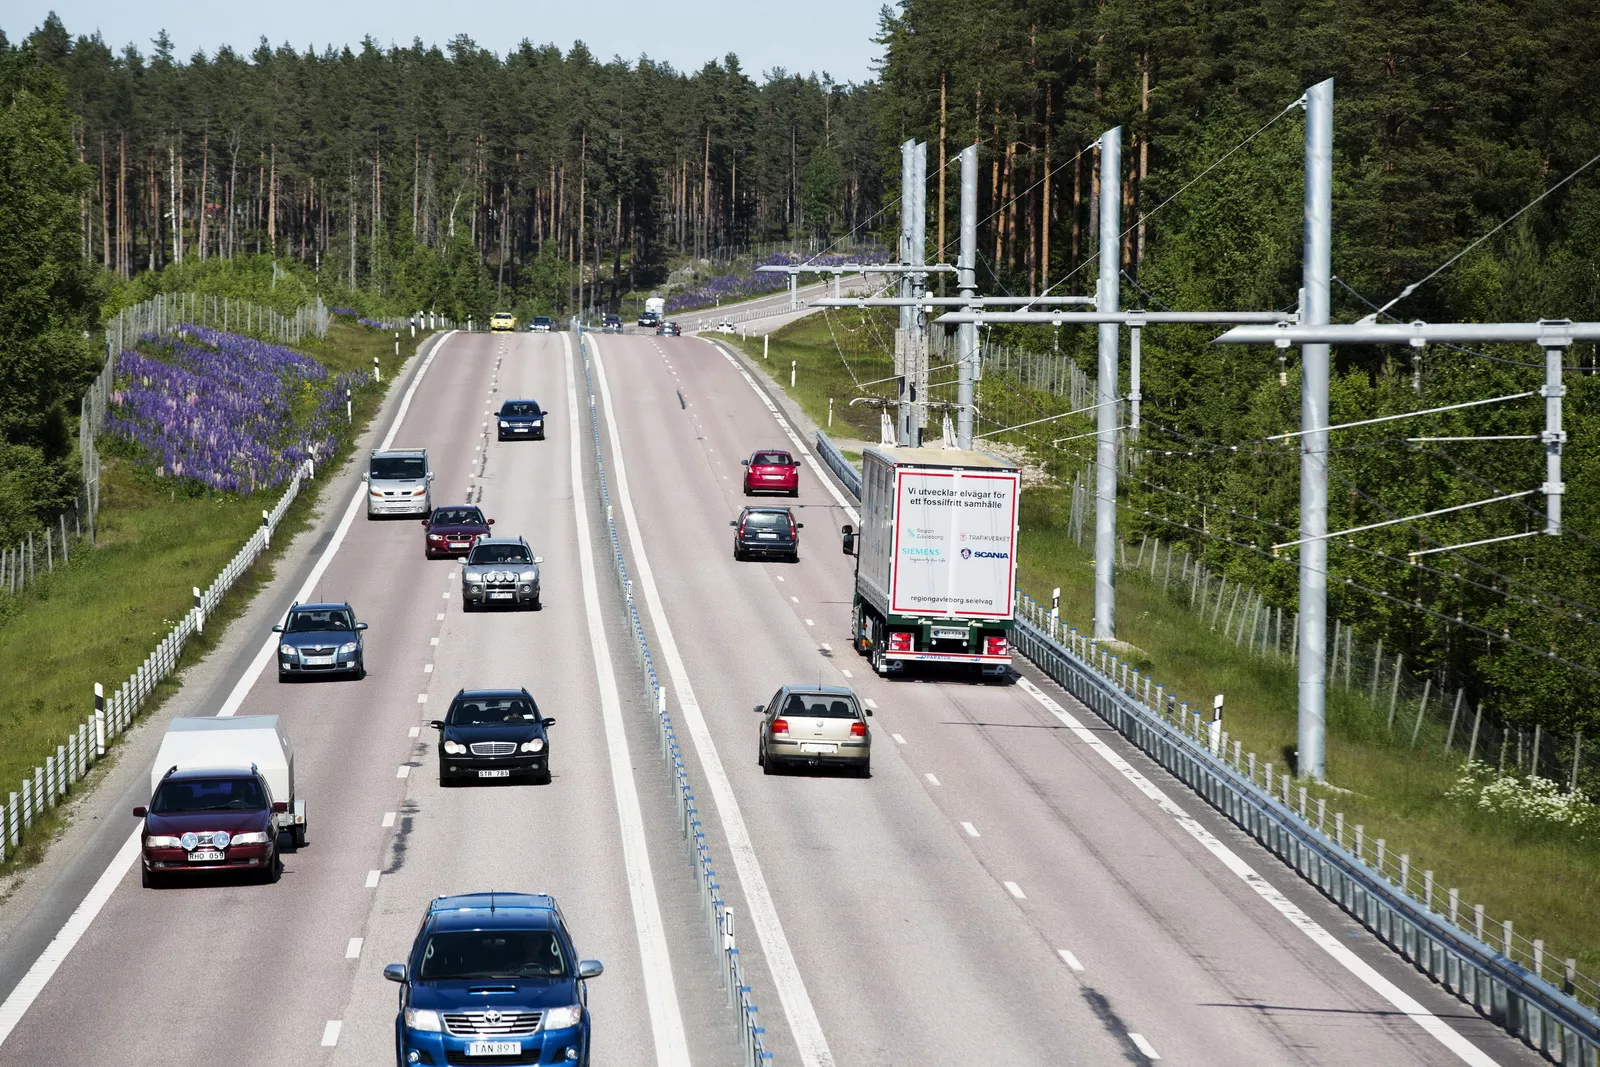 What is the eHighway Project in Sweden?